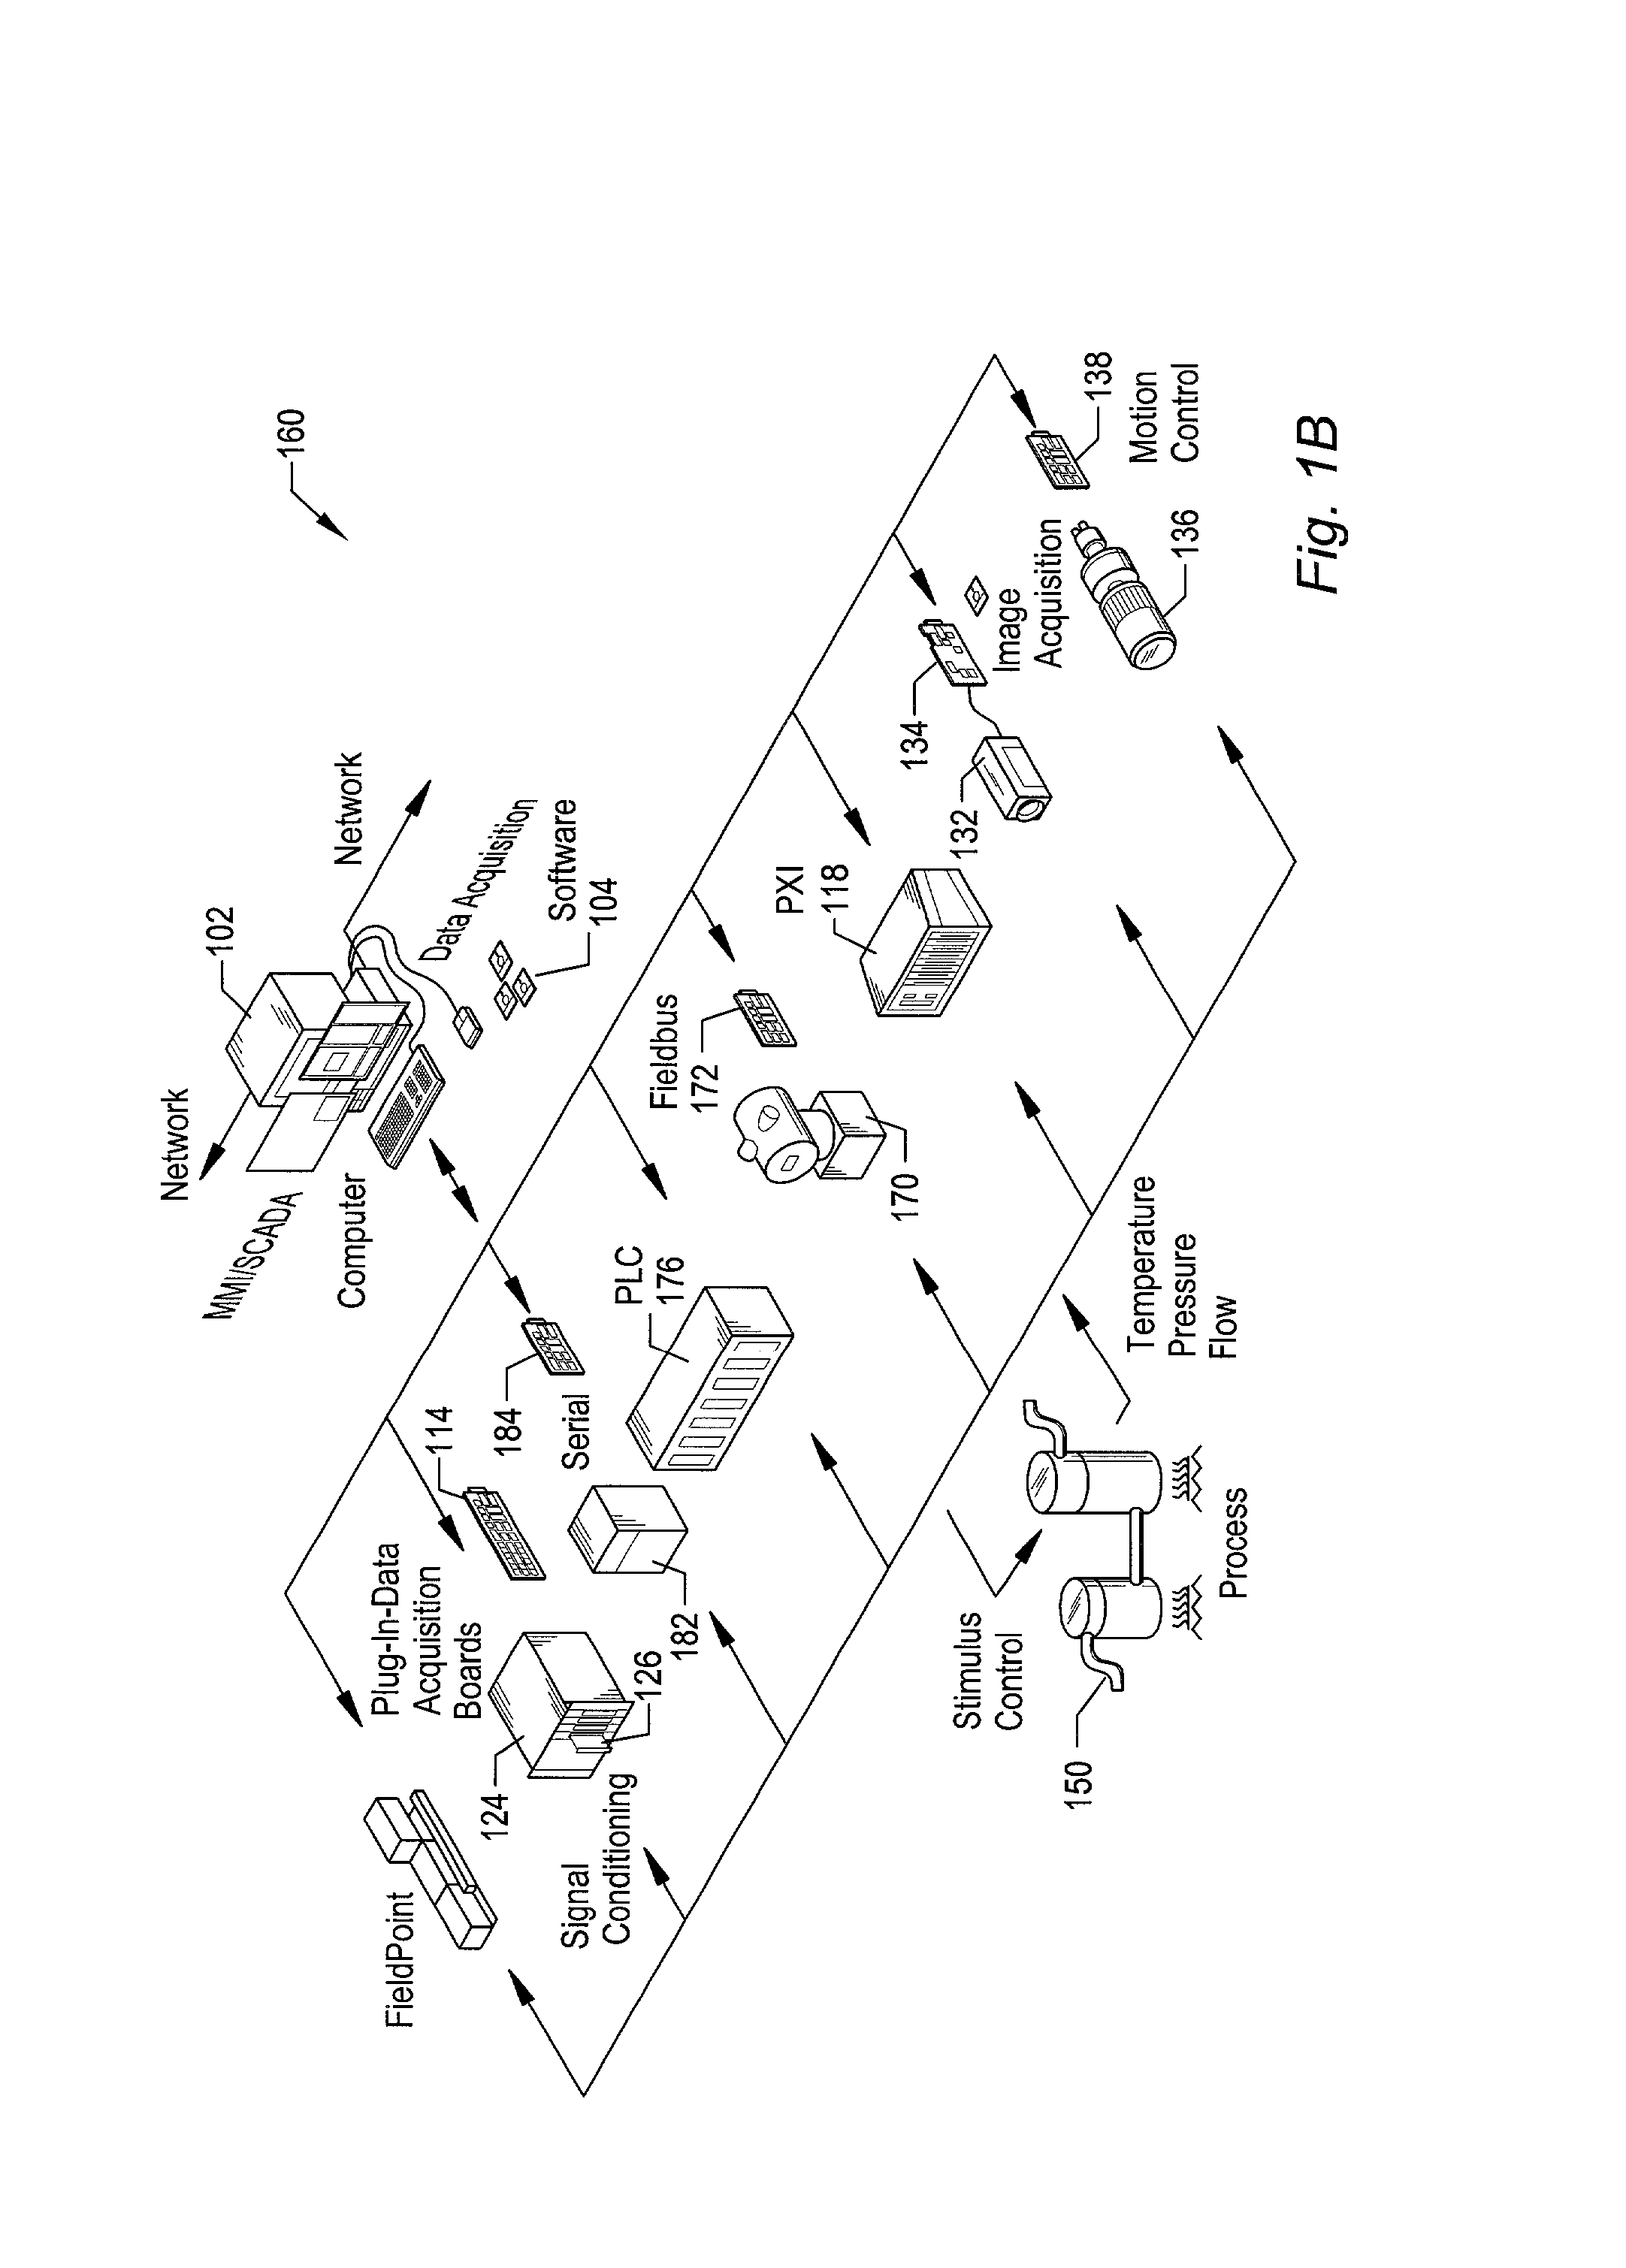 System and method for configuring an instrument to perform measurement functions utilizing conversion of graphical programs into hardware implementations